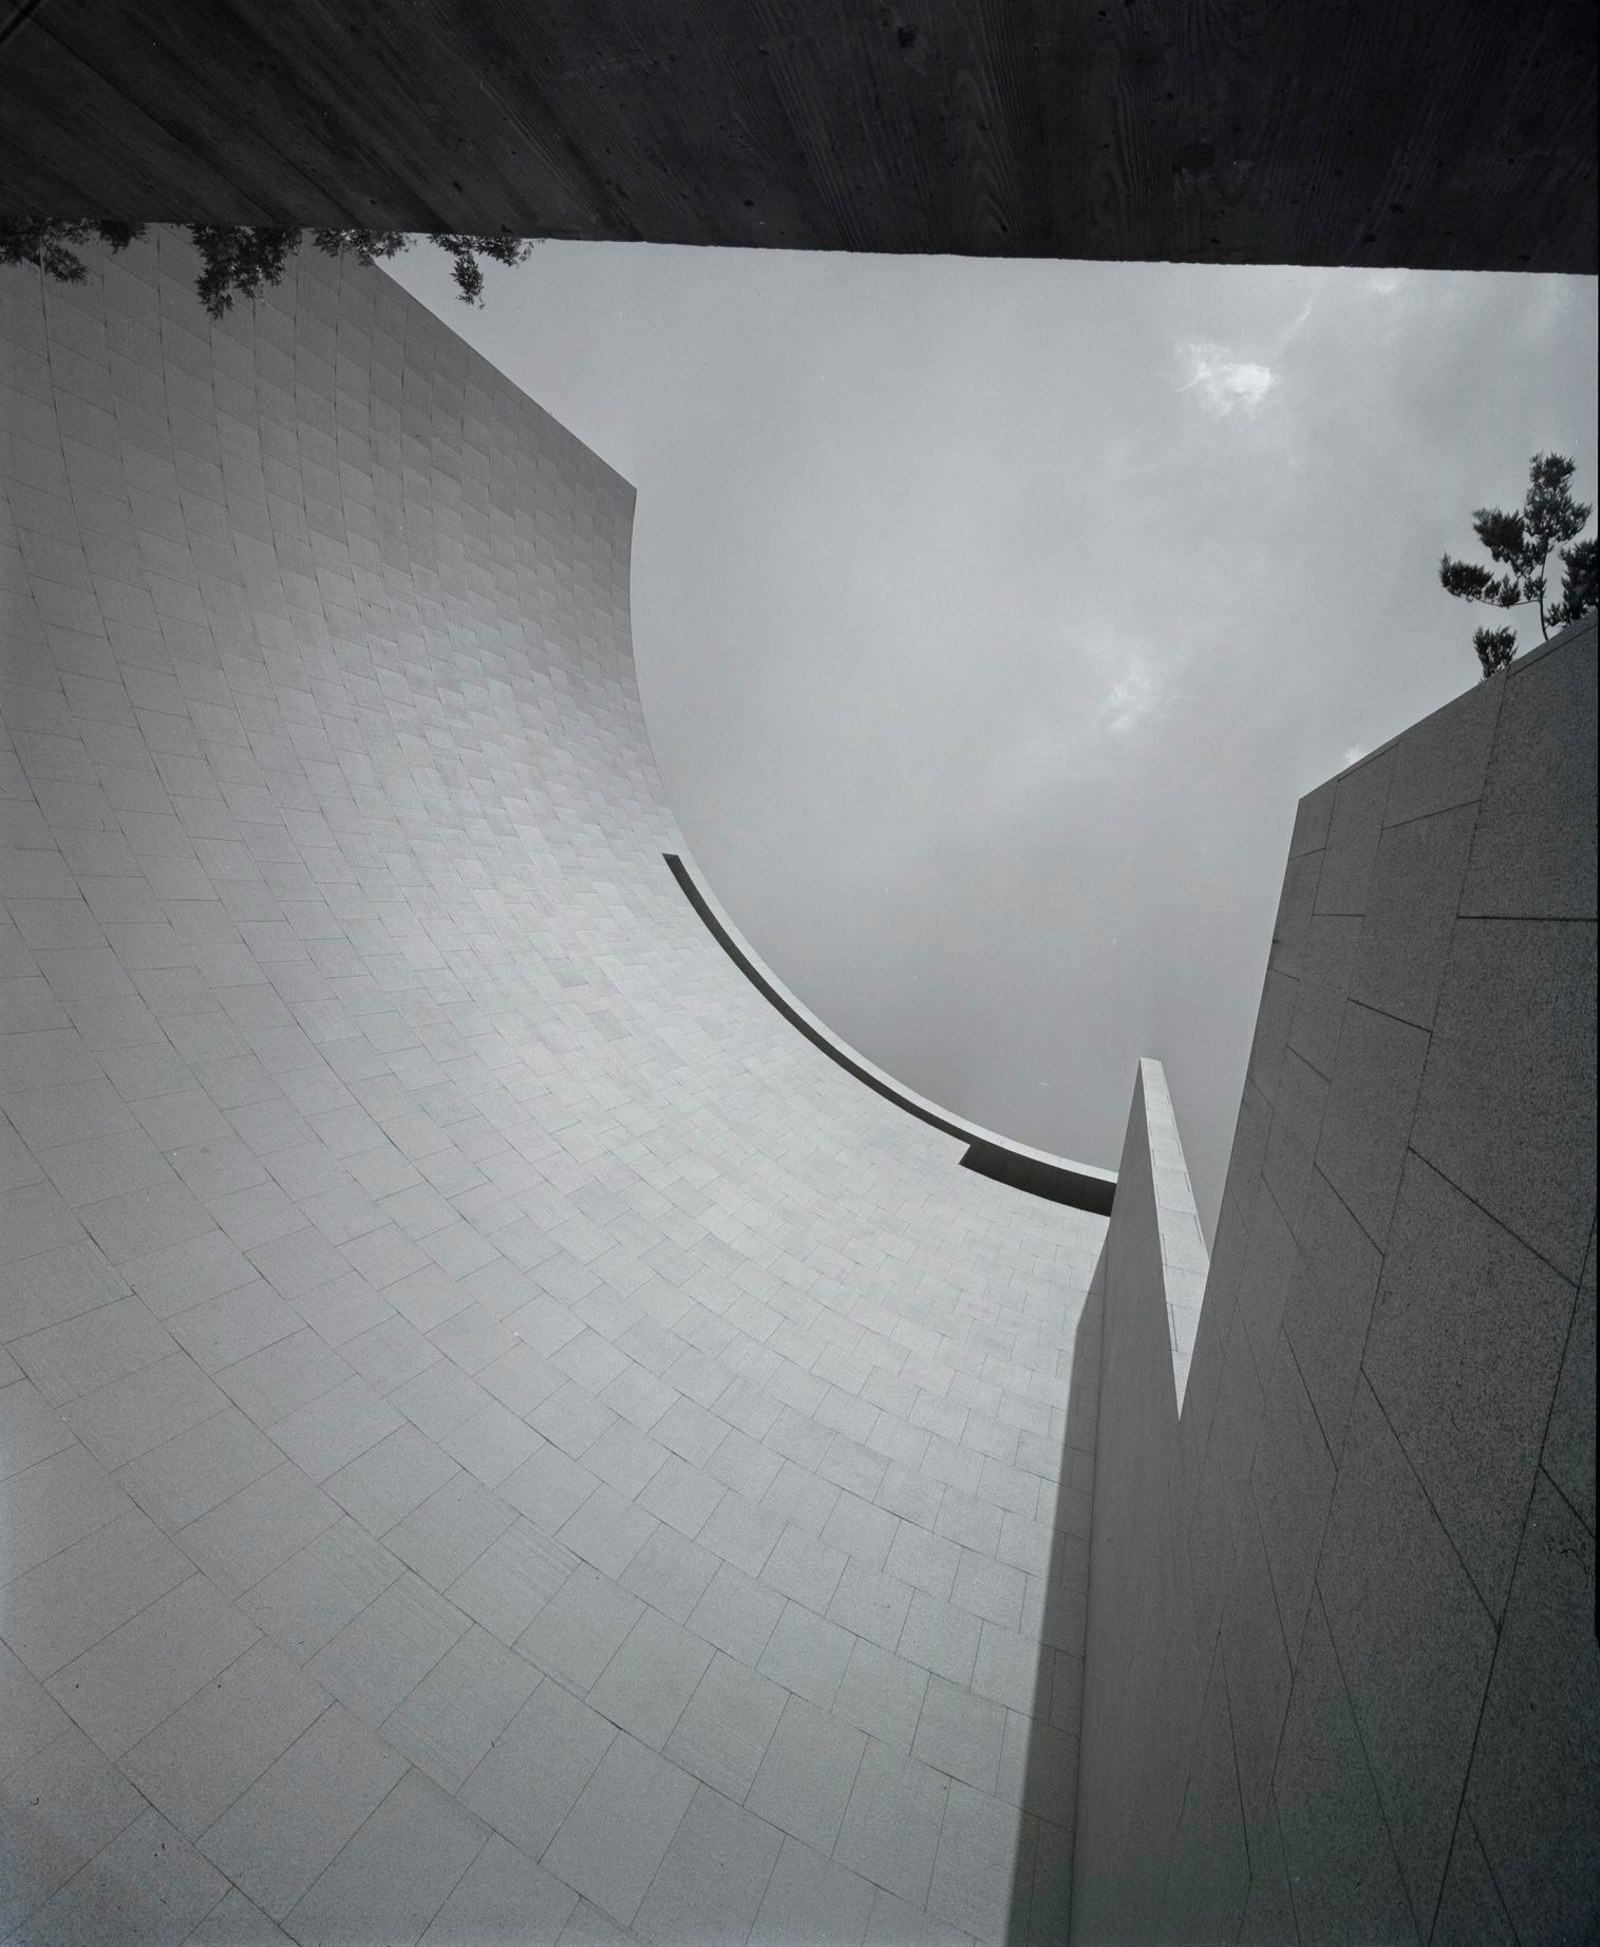 This is a black and white photo of a building facade shaped in a curved quadrant and taken from the base of the building looking up